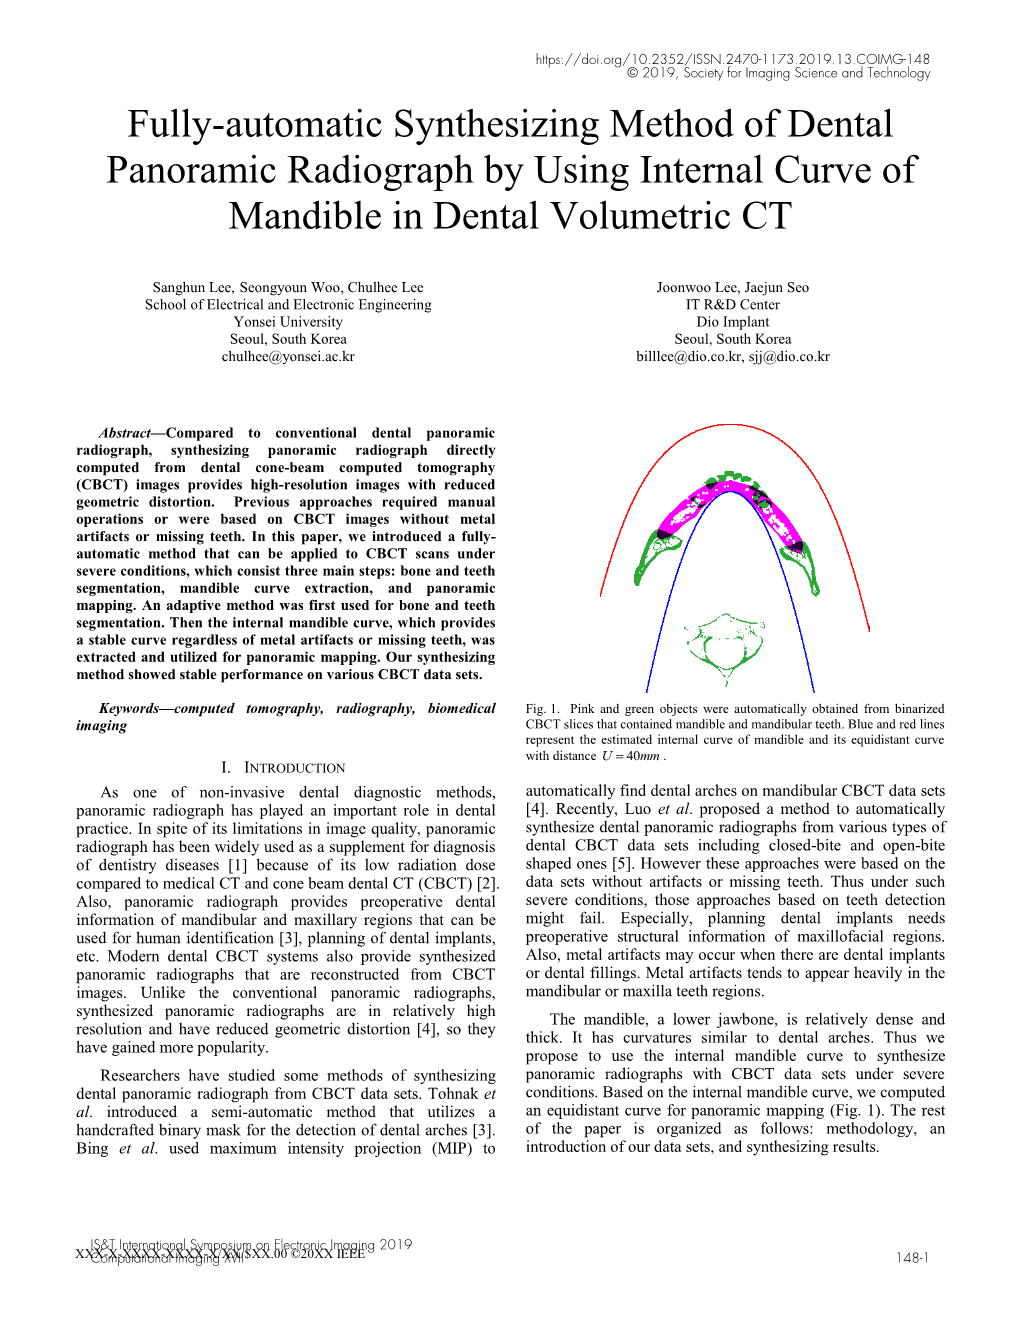 Fully-Automatic Synthesizing Method of Dental Panoramic Radiograph by Using Internal Curve of Mandible in Dental Volumetric CT